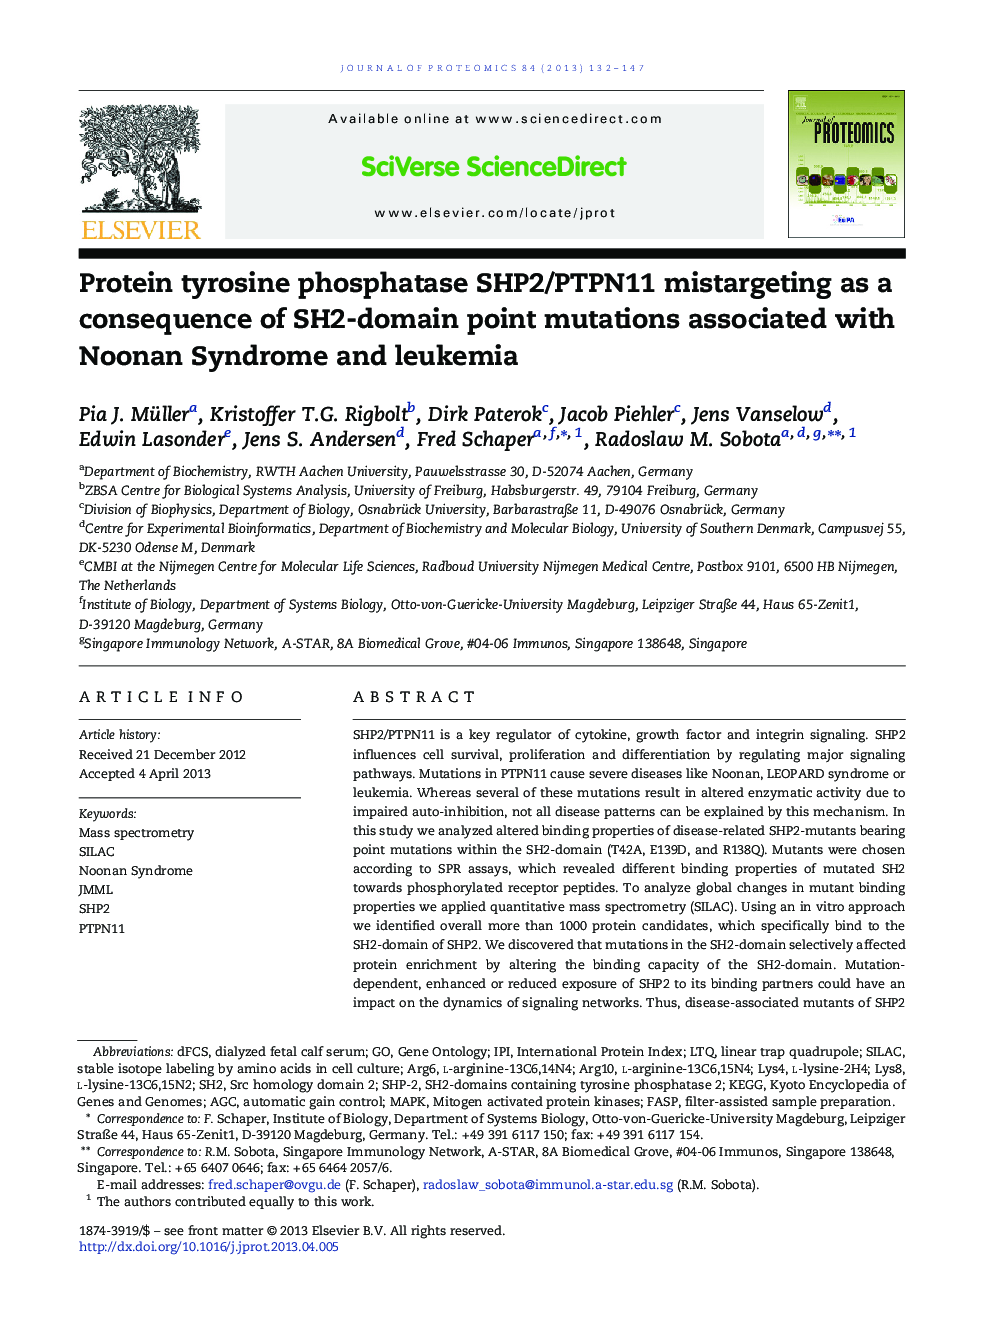 Protein tyrosine phosphatase SHP2/PTPN11 mistargeting as a consequence of SH2-domain point mutations associated with Noonan Syndrome and leukemia